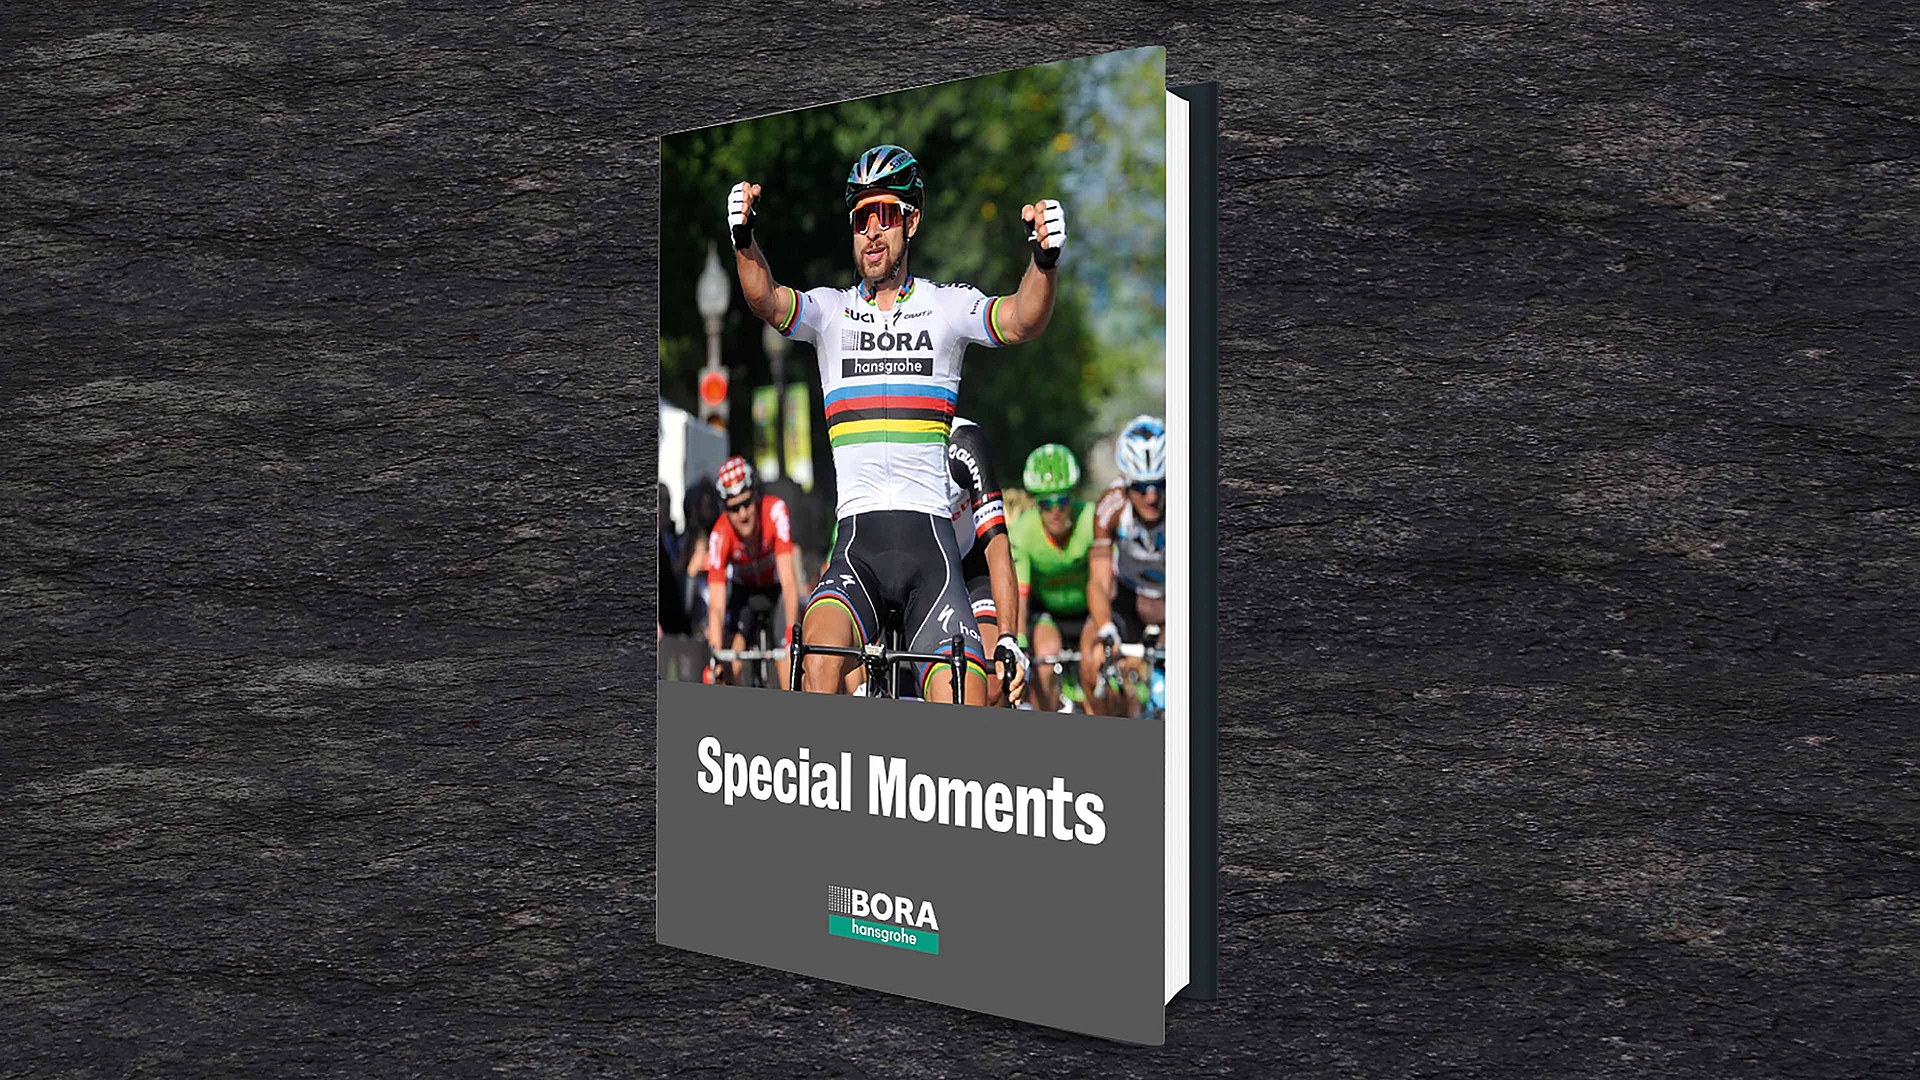 The Special Moments picture book documents the fast-paced 2017 season